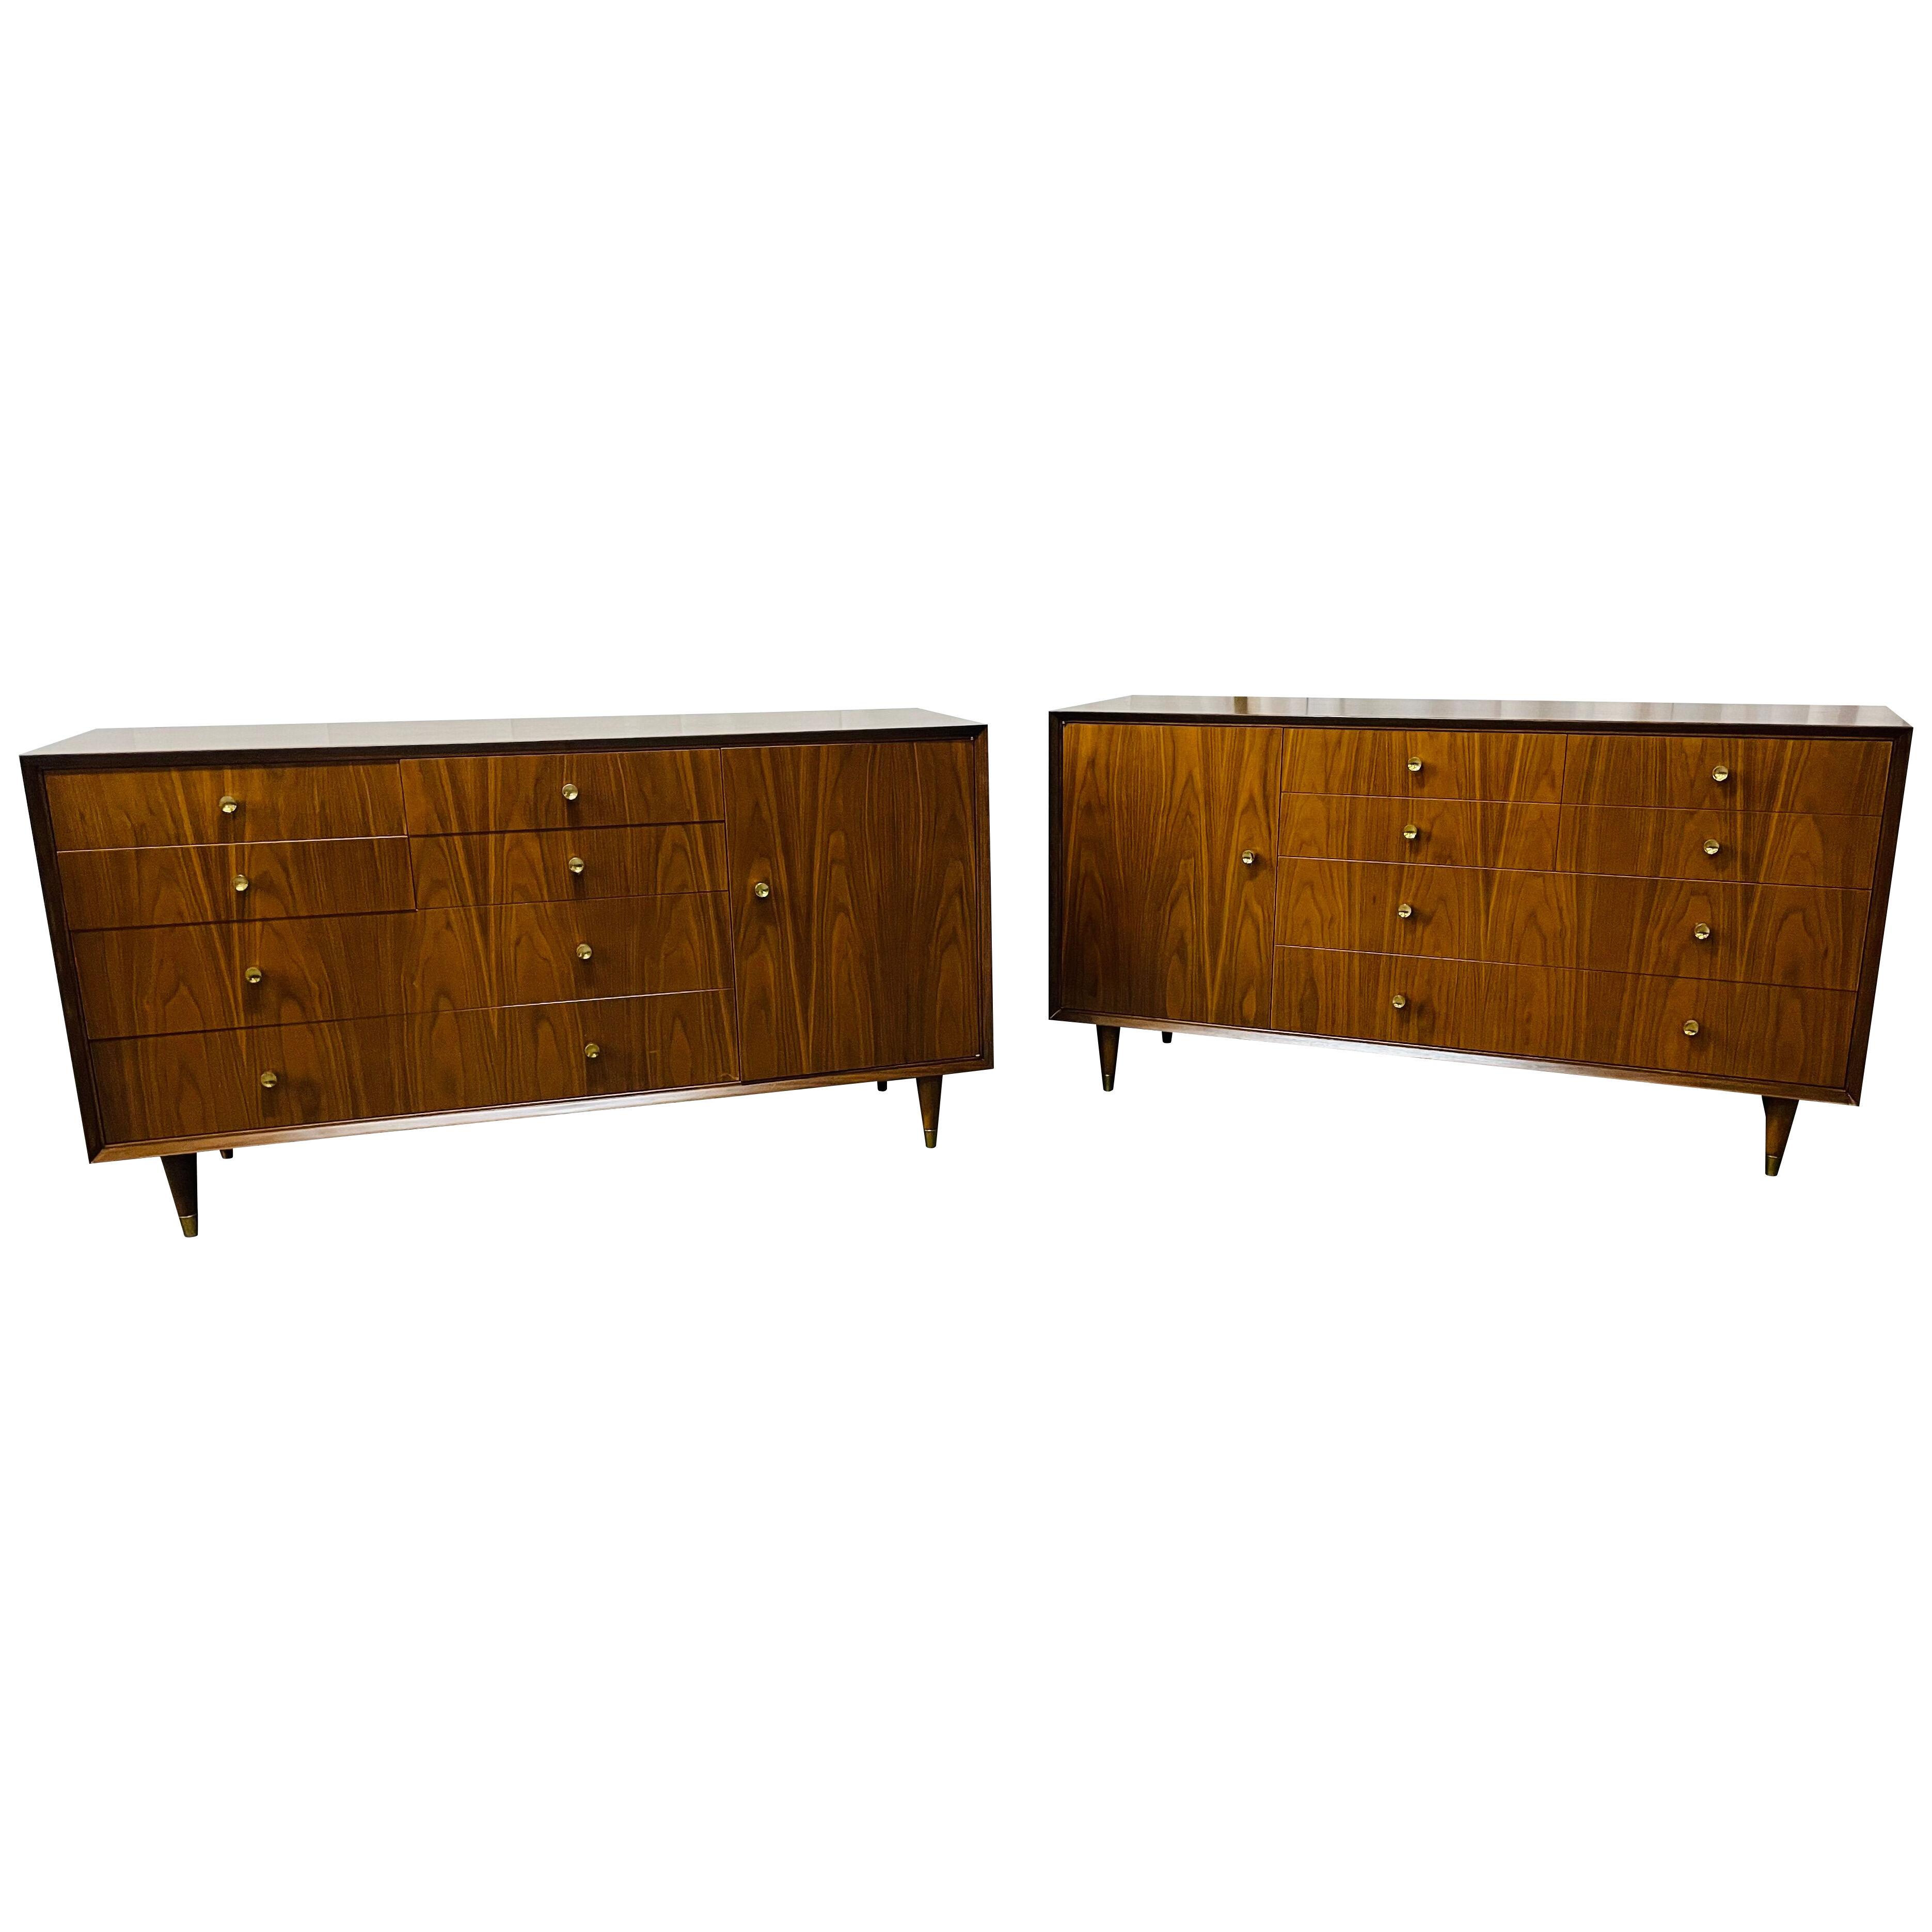 Pair of Mid Century Modern Chests, Dressers Bedside Stands, Opposing, Refinished